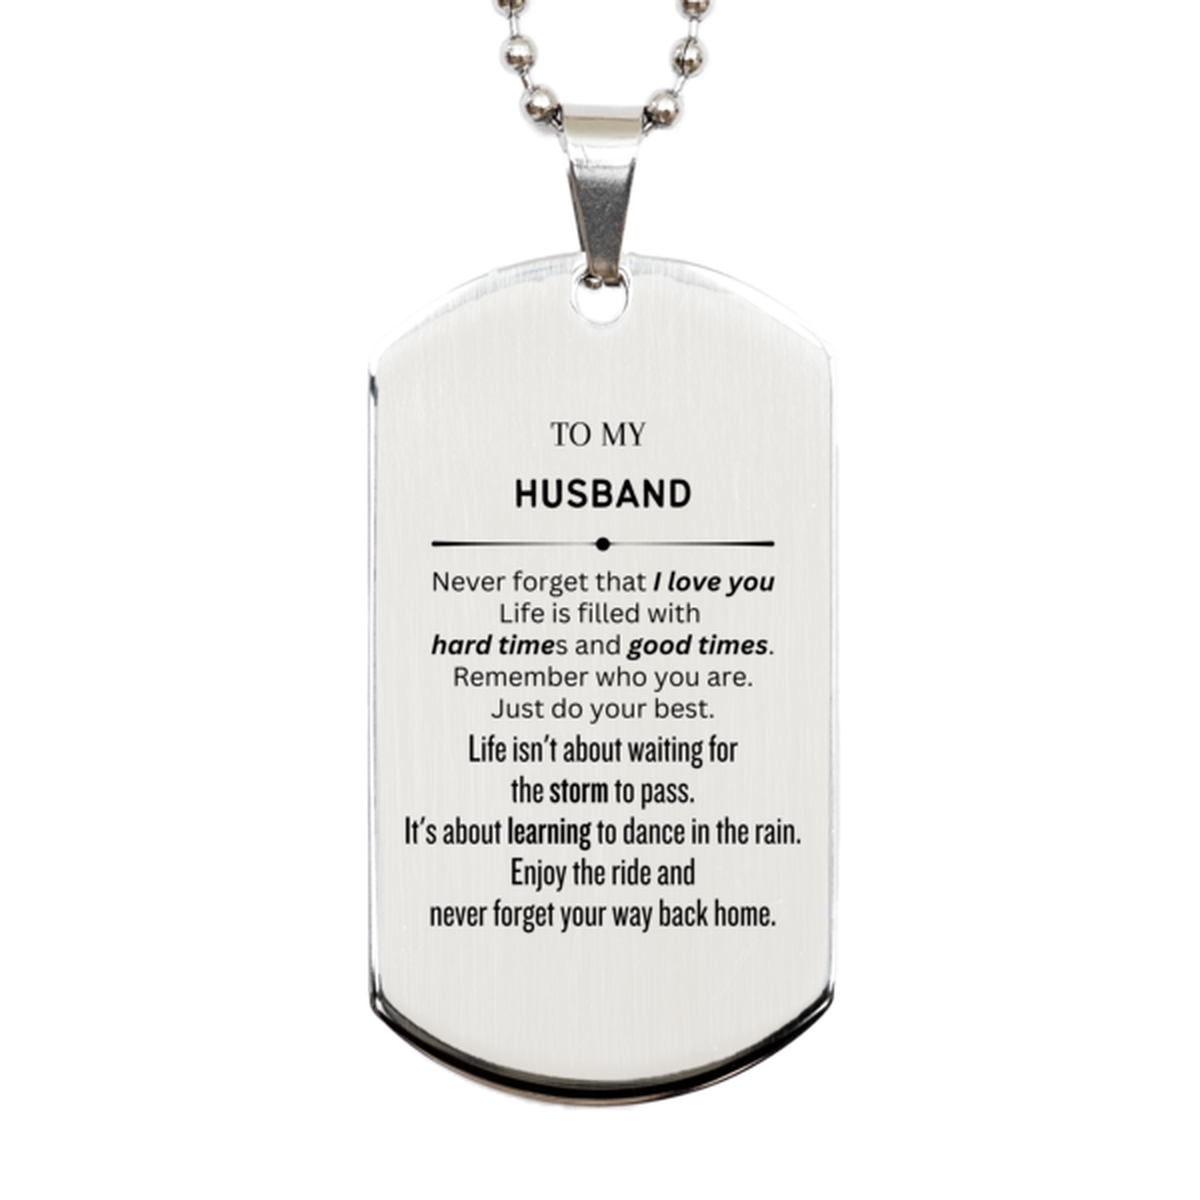 Christmas Husband Silver Dog Tag Gifts, To My Husband Birthday Thank You Gifts For Husband, Graduation Unique Gifts For Husband To My Husband Never forget that I love you life is filled with hard times and good times. Remember who you are. Just do your be